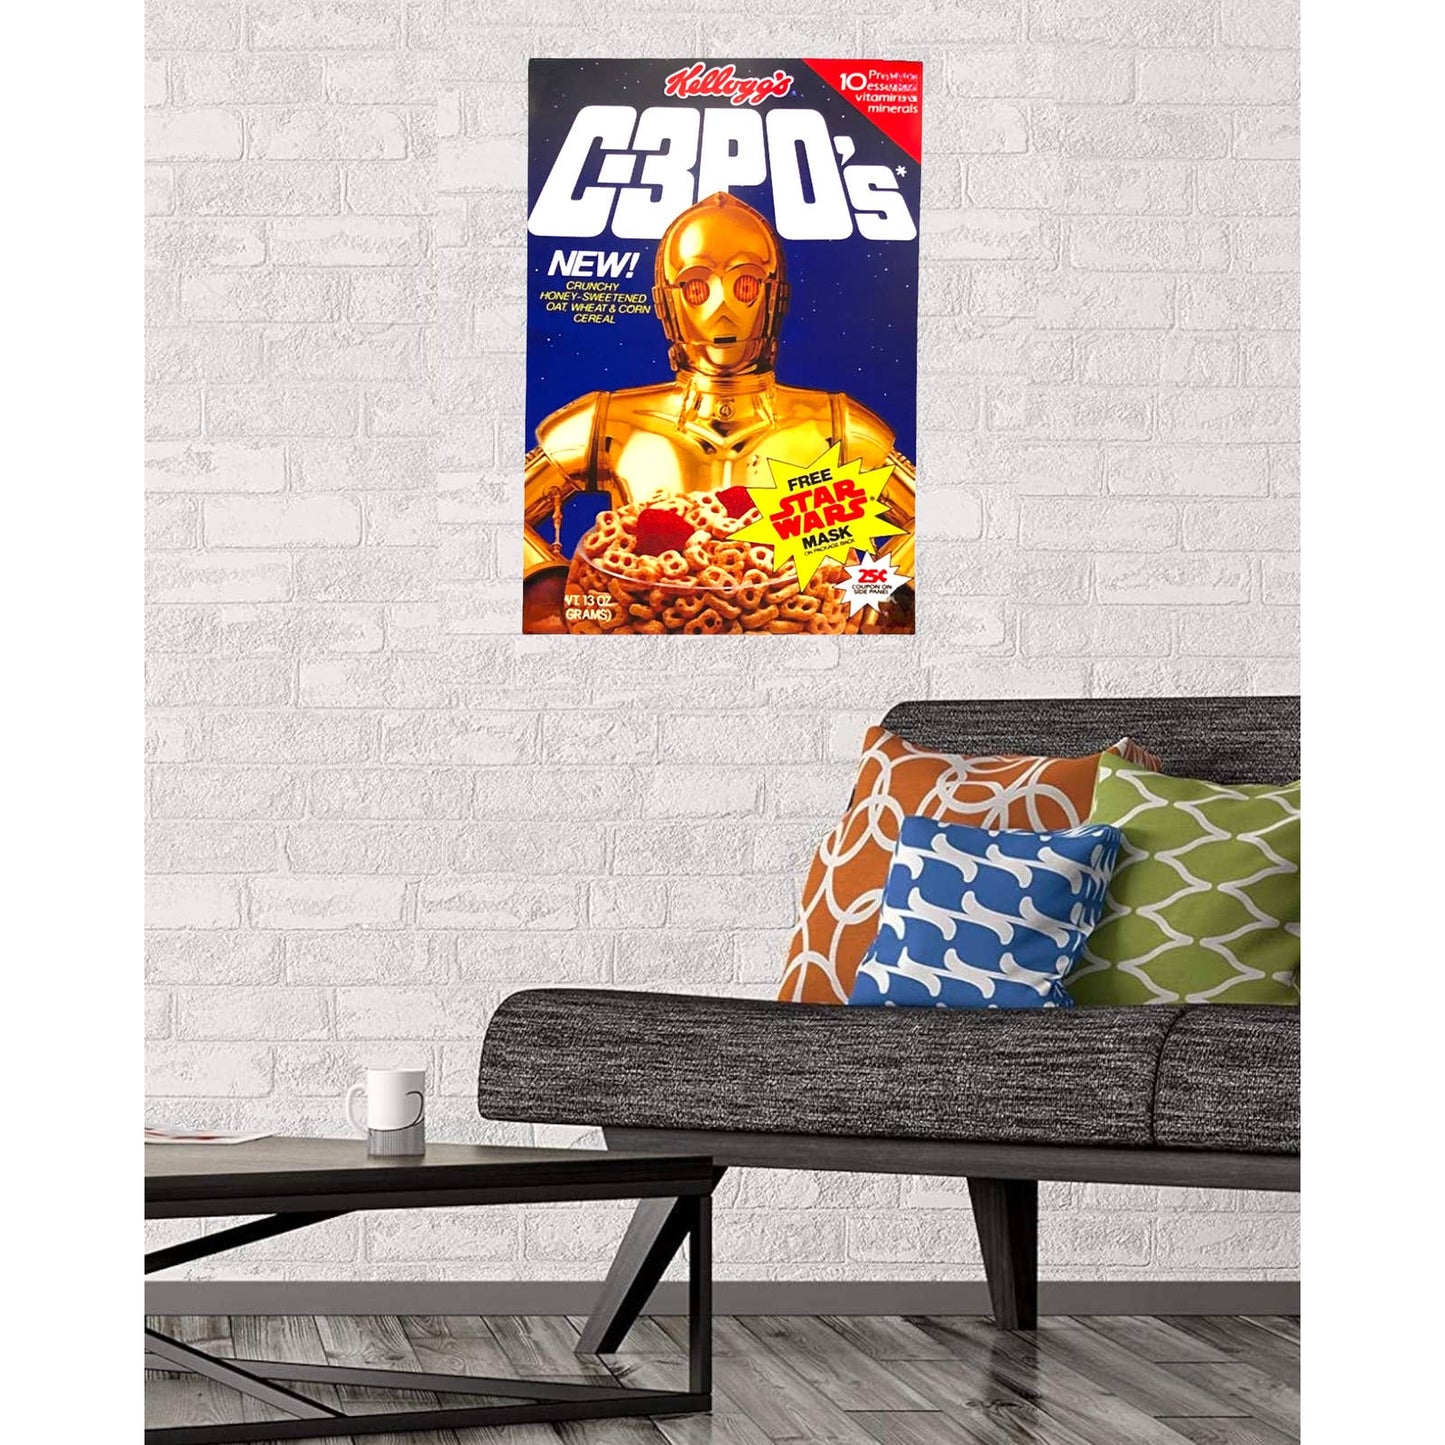 Star Wars C-P30's C Cereal Box Cover Poster Print Wall Art 16"x24"